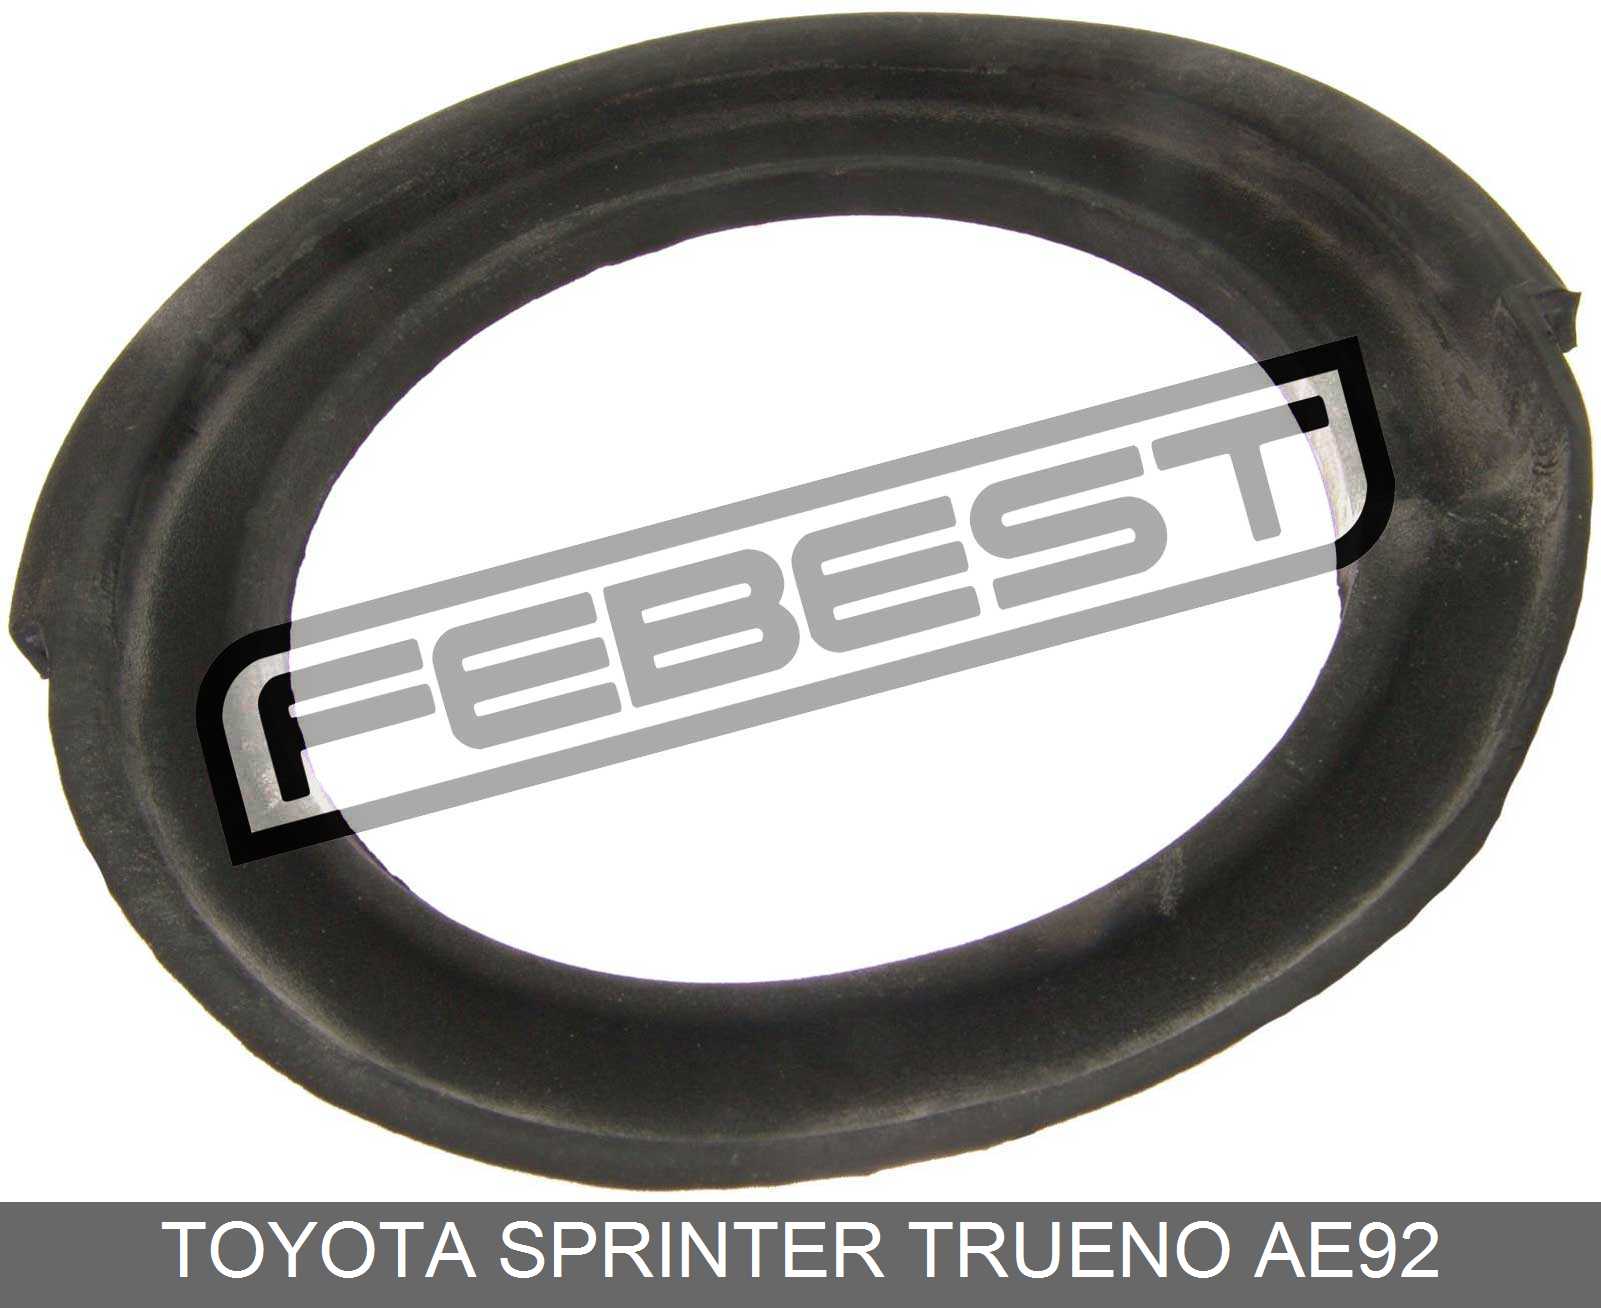 Fits TOYOTA SPRINTER TRUENO AE92 Lower Coil Spring Mount Rubber Pad